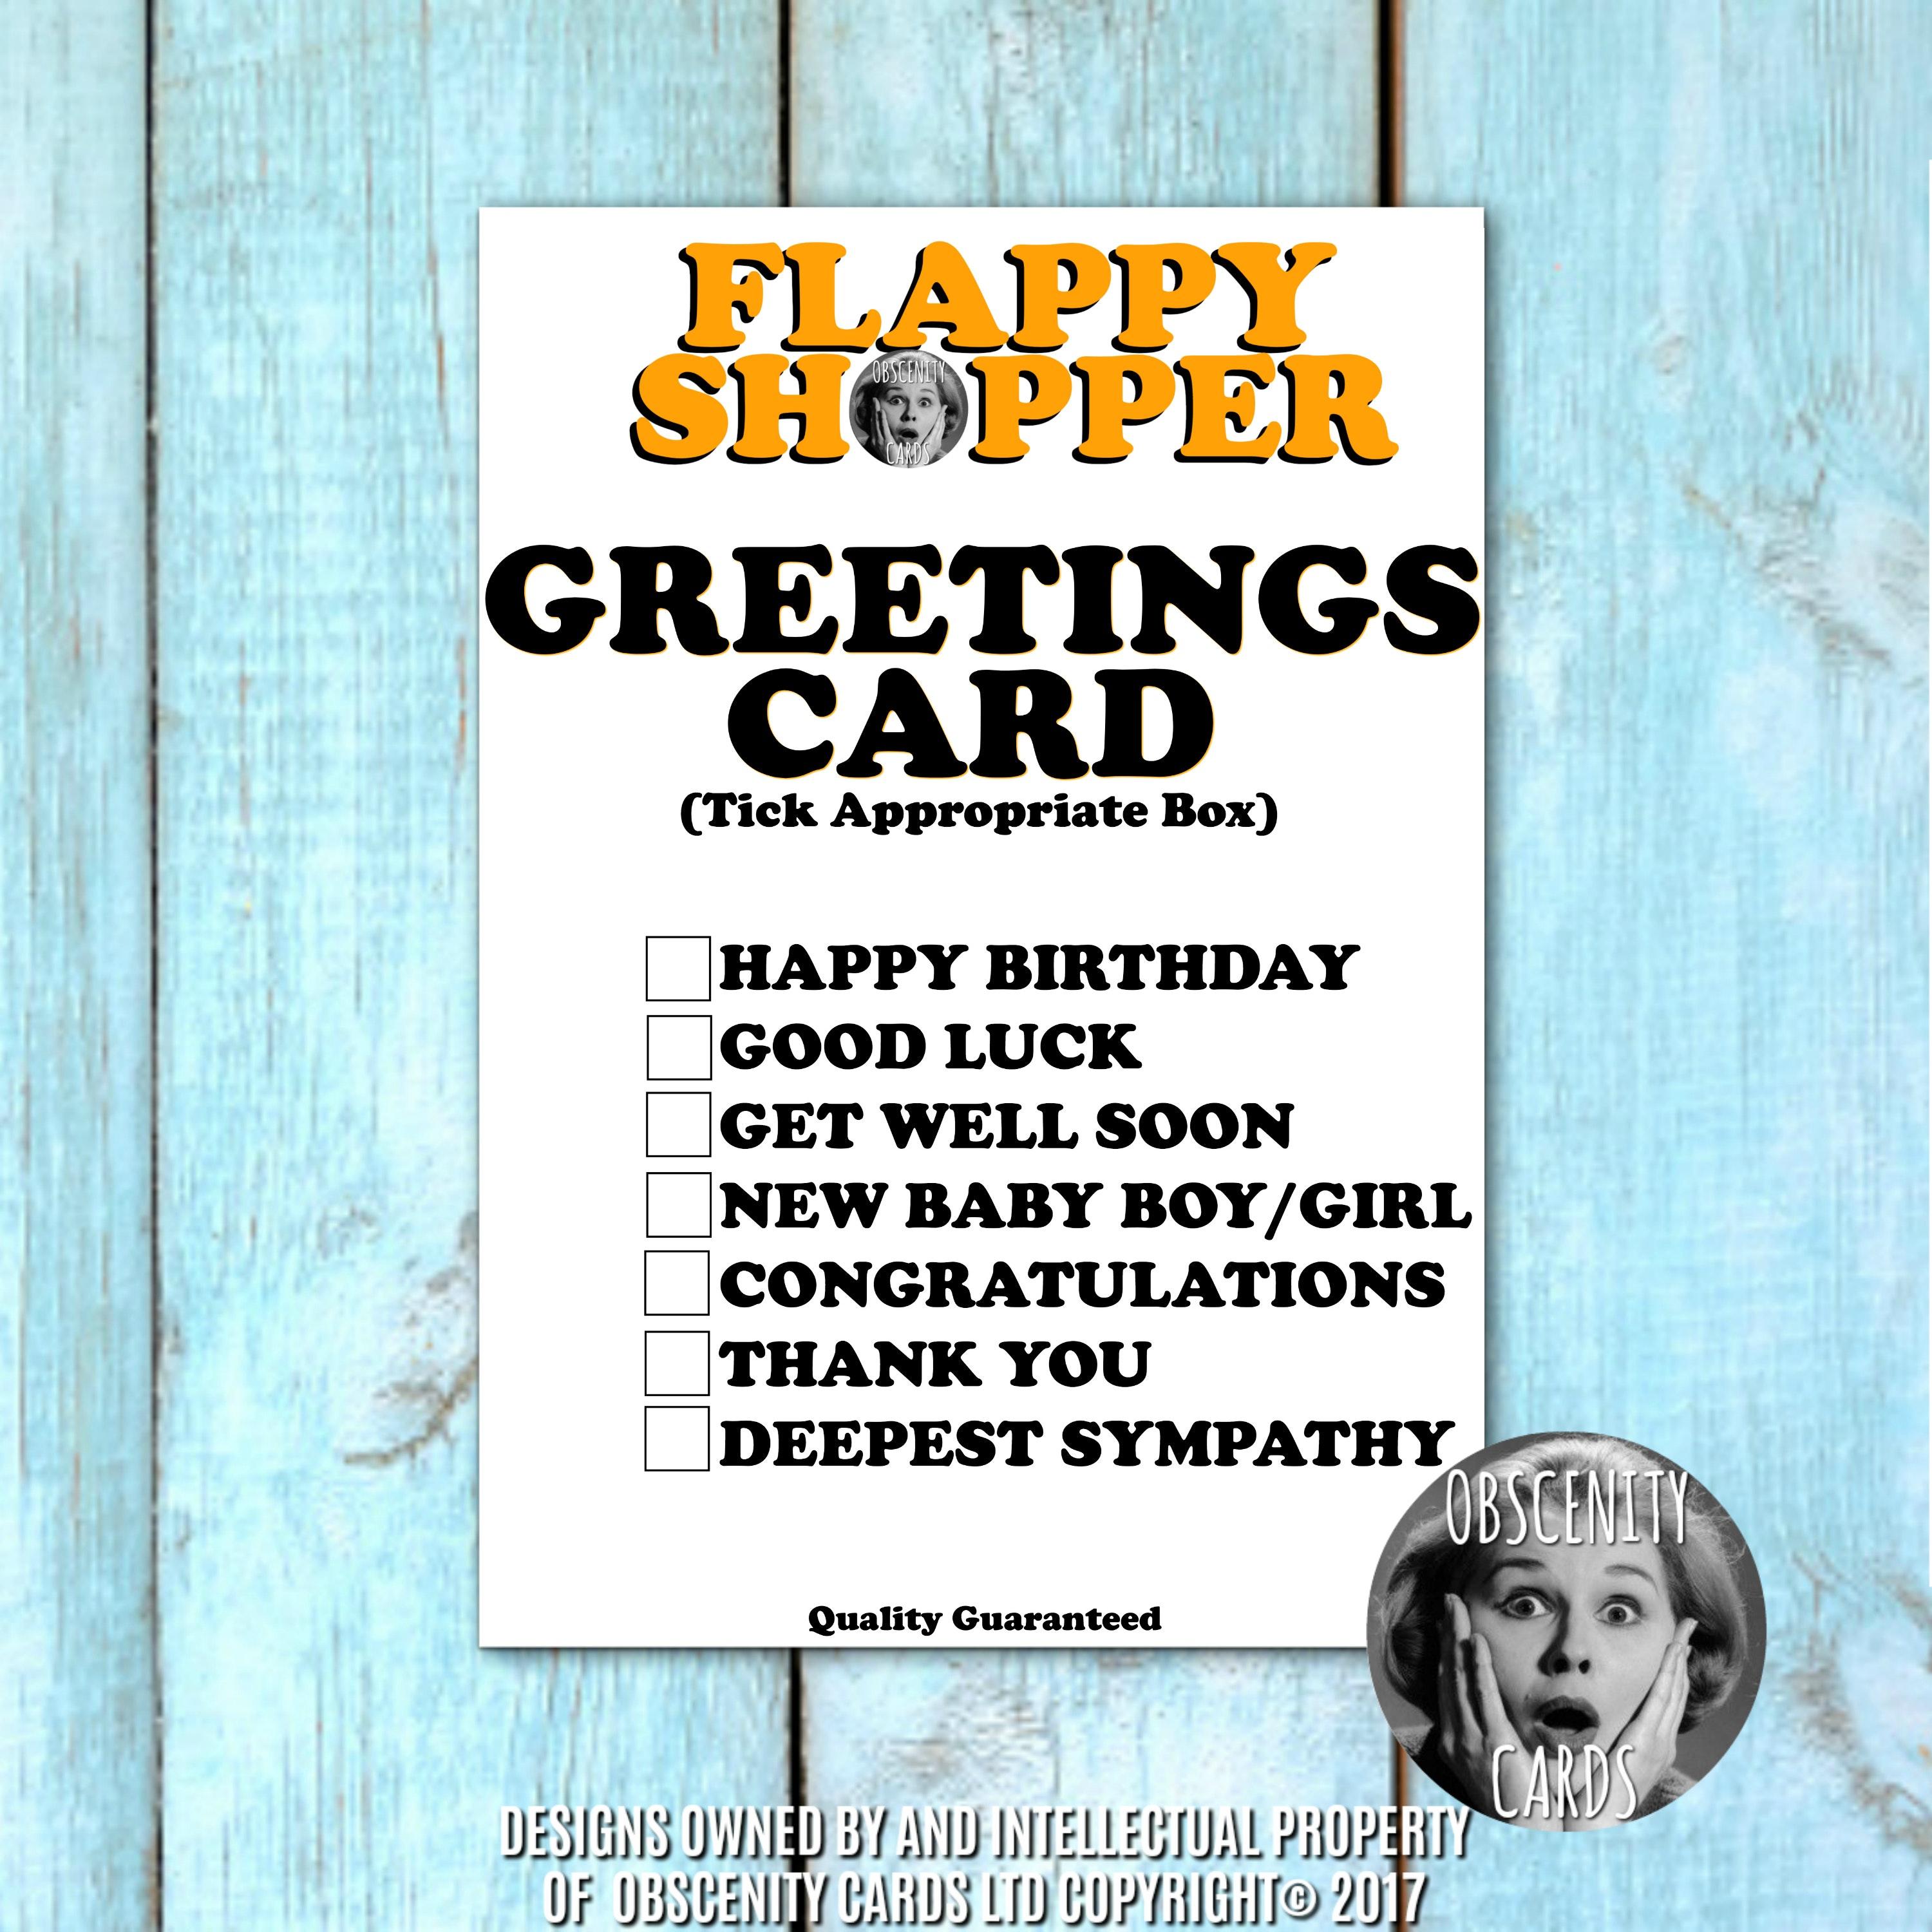 FLAPPY SHOPPER! GREETINGS CARD. Obscene funny offensive birthday cards by Obscenity cards. Obscene Funny Cards, Pens, Party Hats, Key rings, Magnets, Lighters & Loads More!